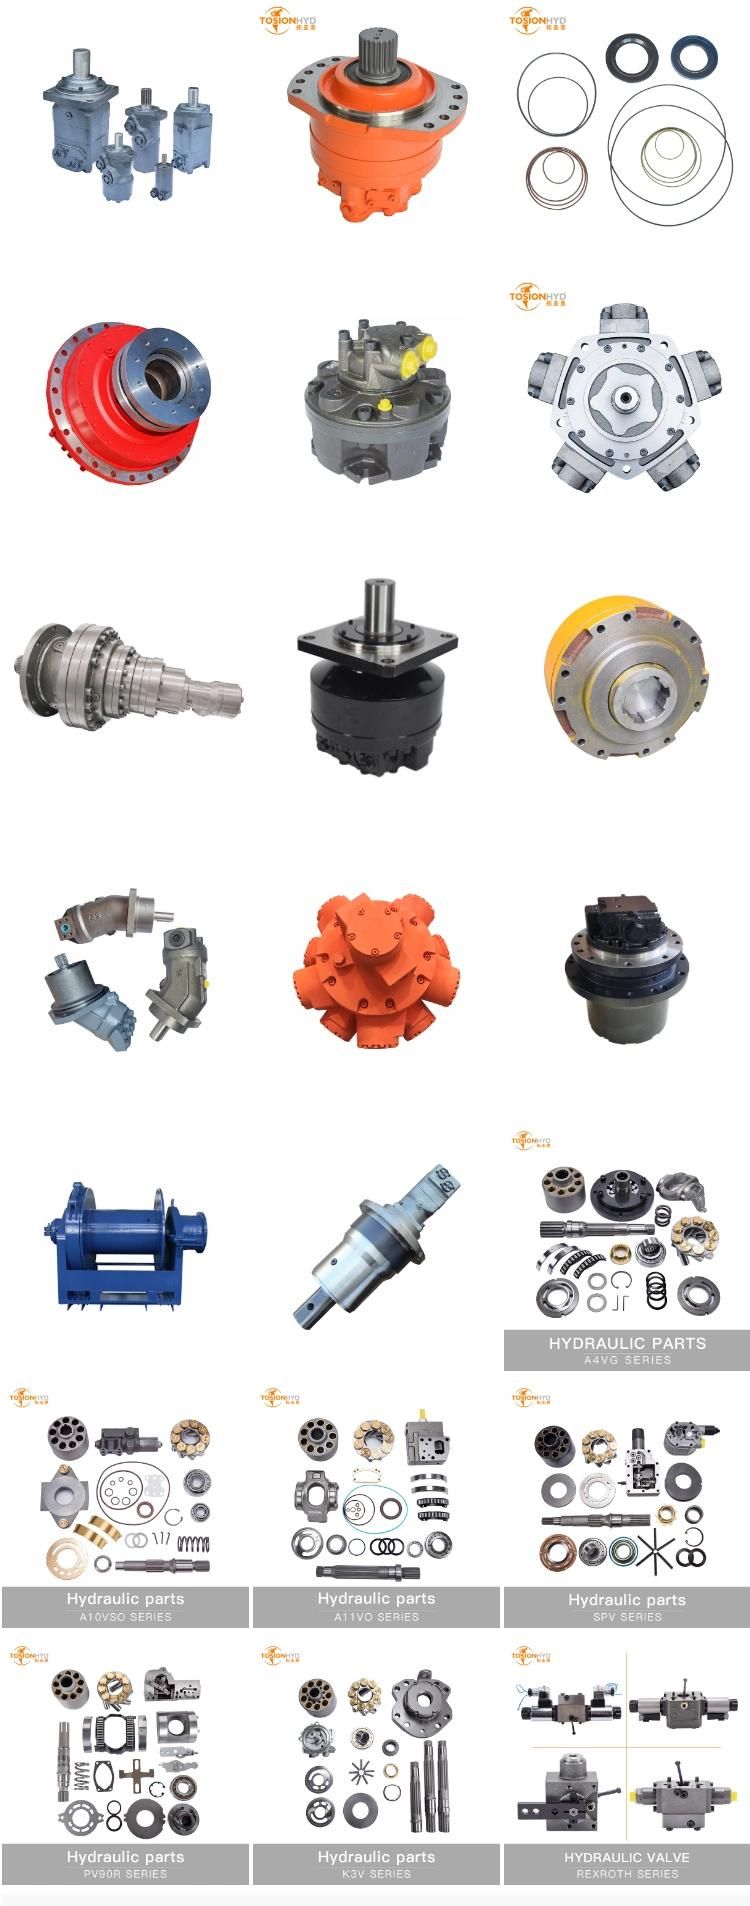 A2FM 63 Hydraulic Motor Parts with Rexroth Spare Repair Kits